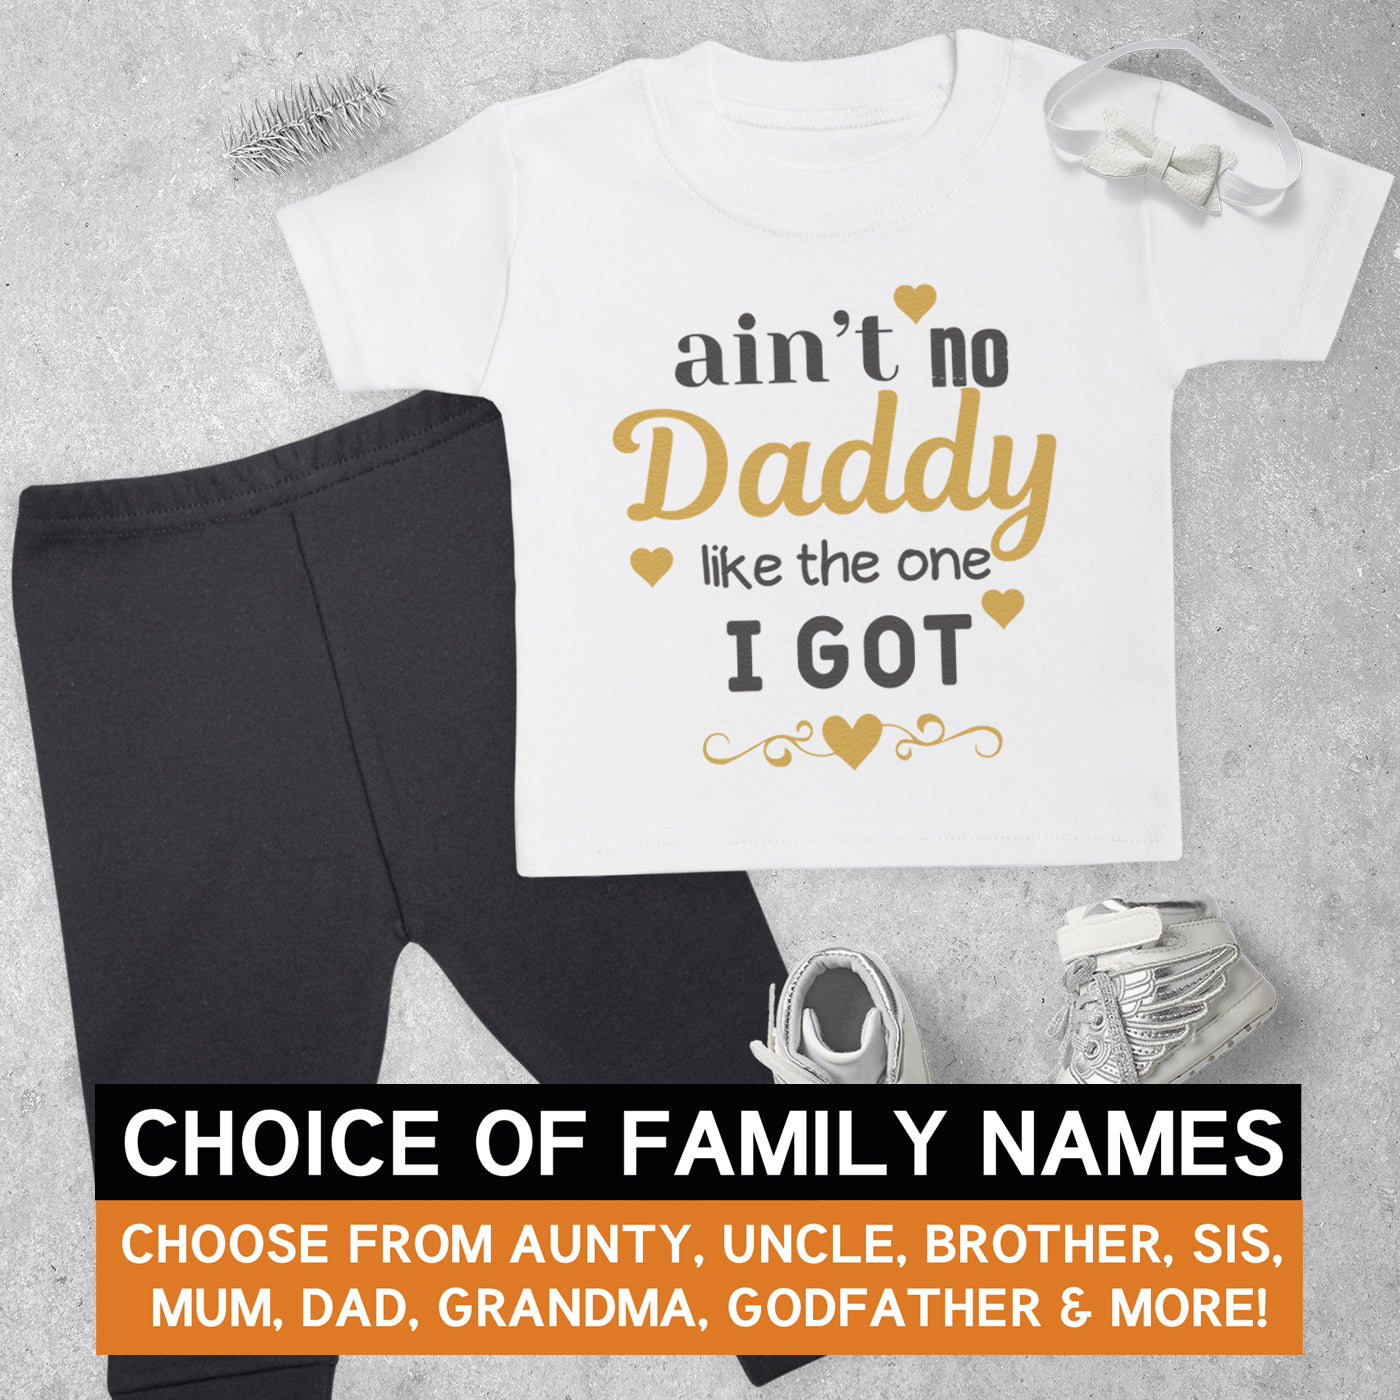 Pick A Family Name - Aint No Mummy, Auntie, Grandad and more - Baby Outfit Set